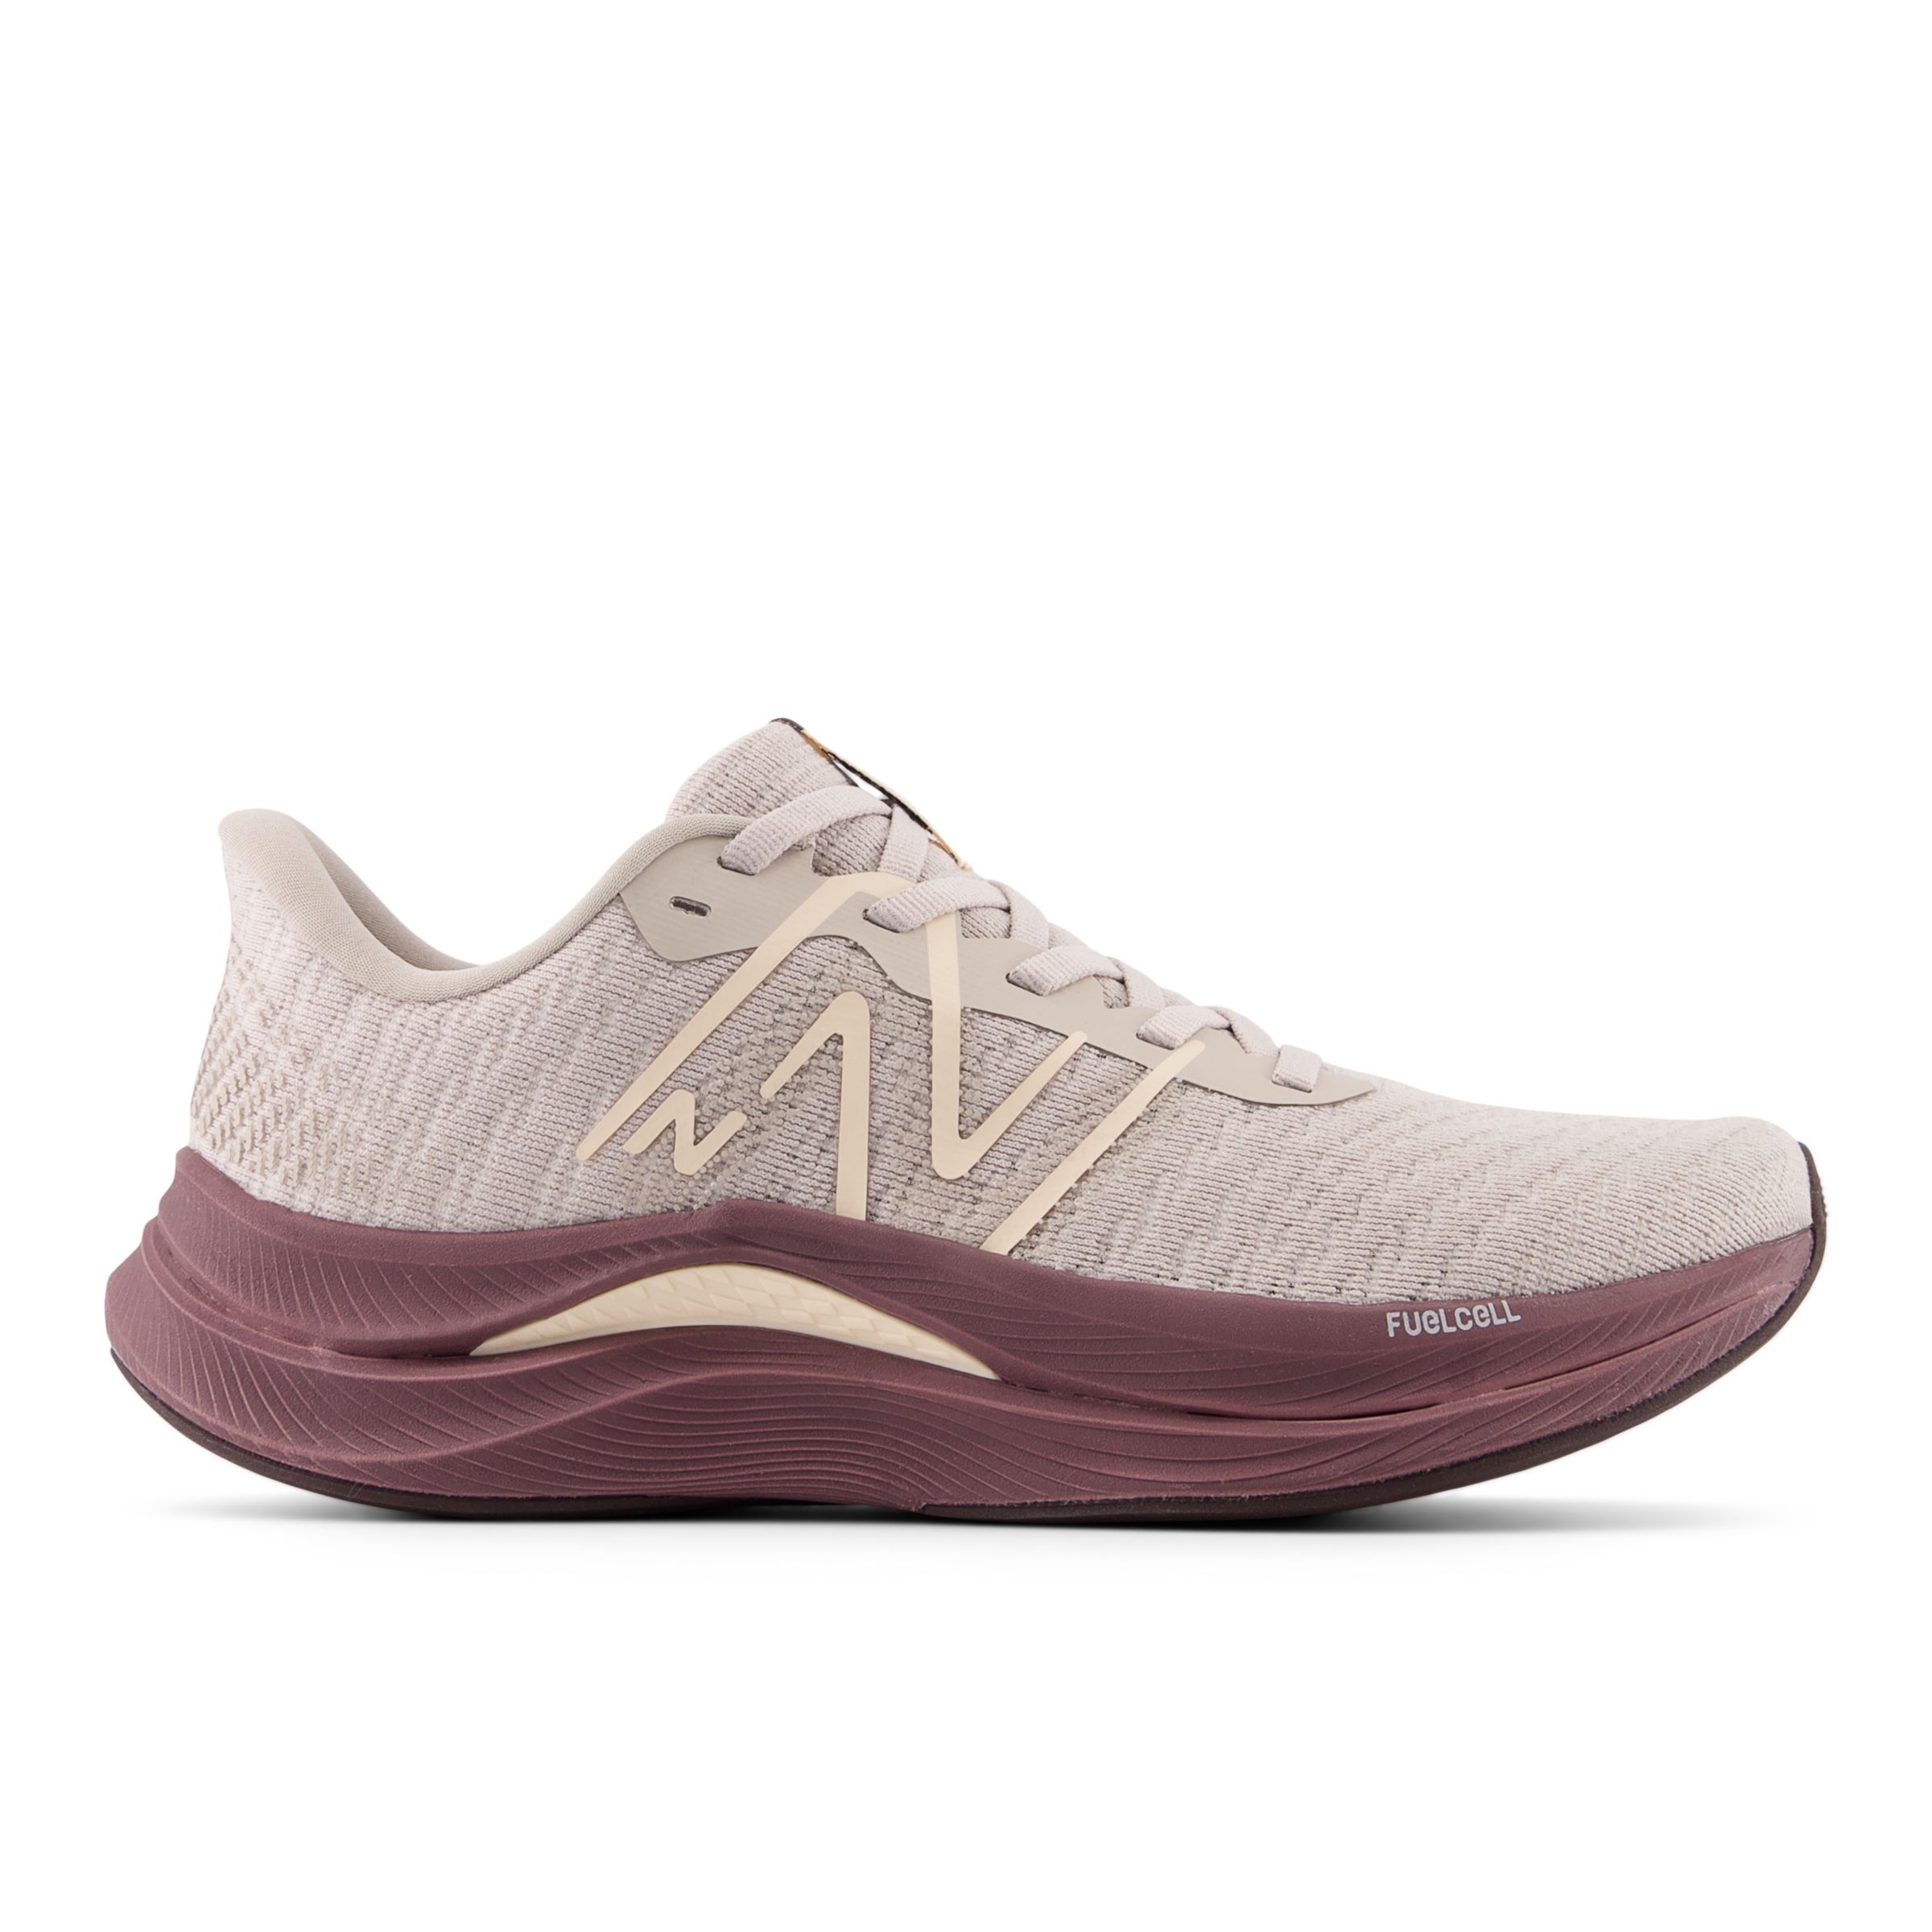 

New Balance Women's FuelCell Propel v4 Grey/Brown/Pink - Grey/Brown/Pink